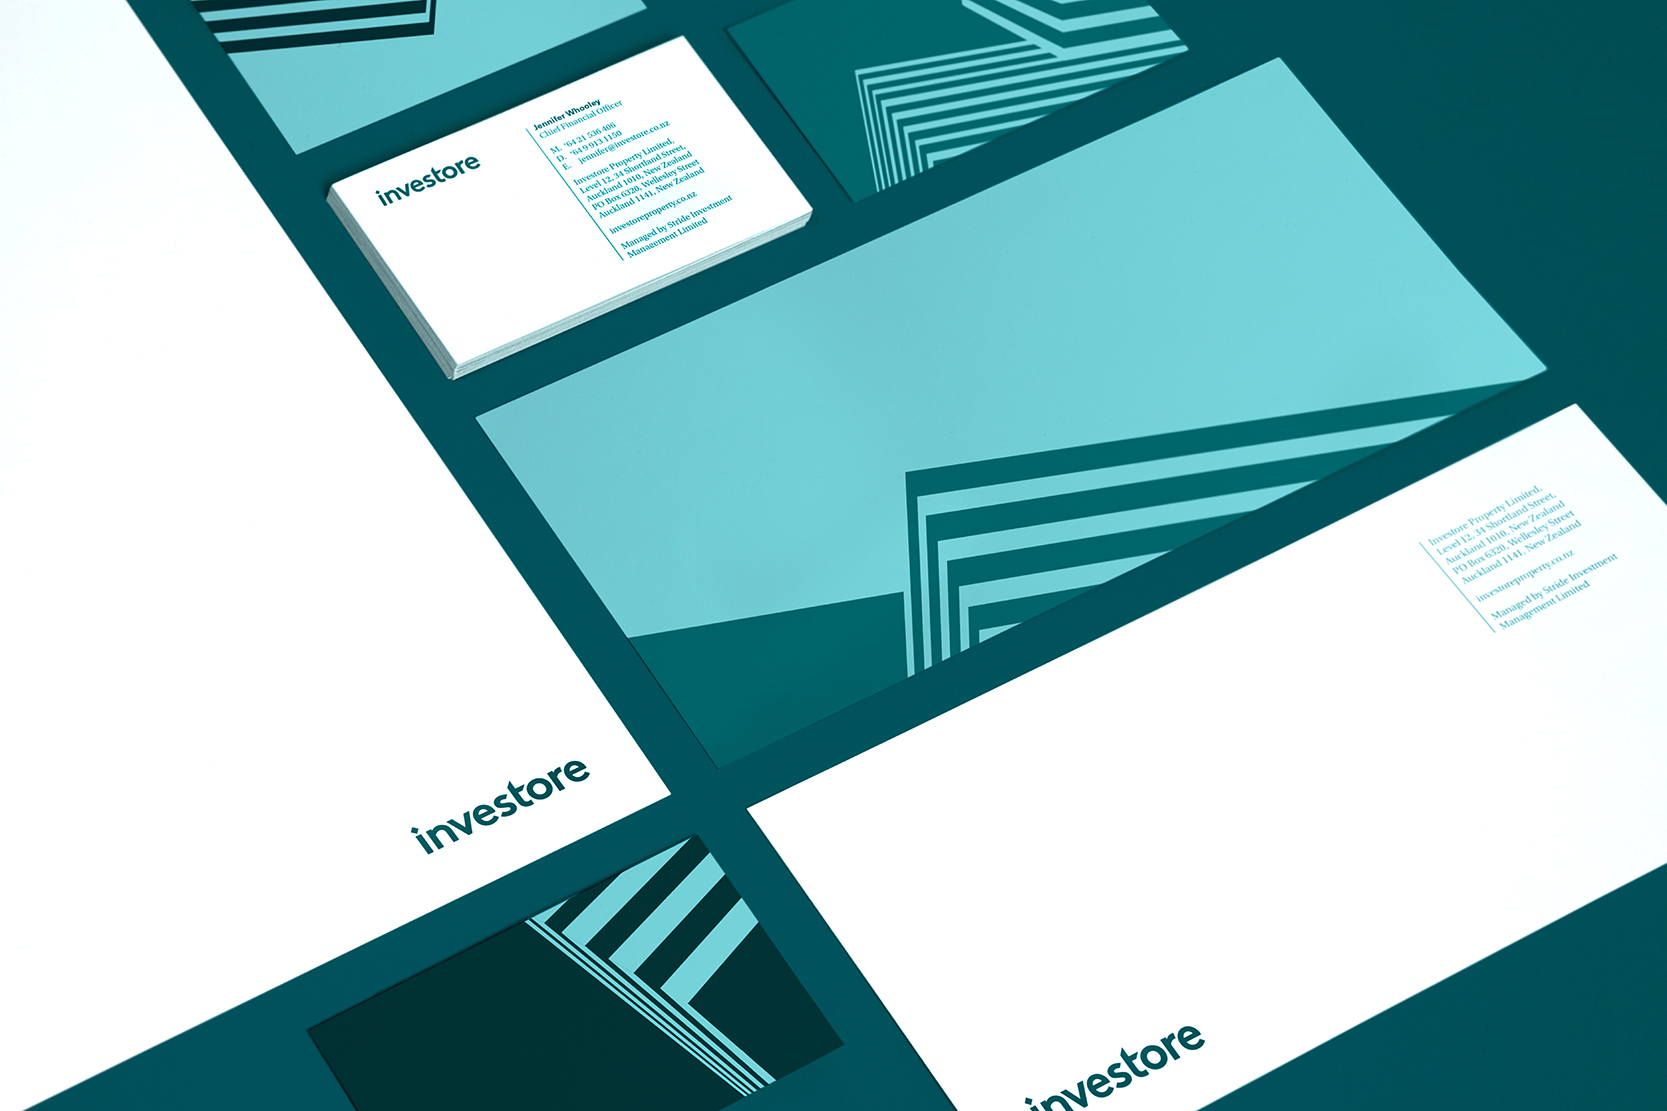 Investore documents, business cards and envelopes